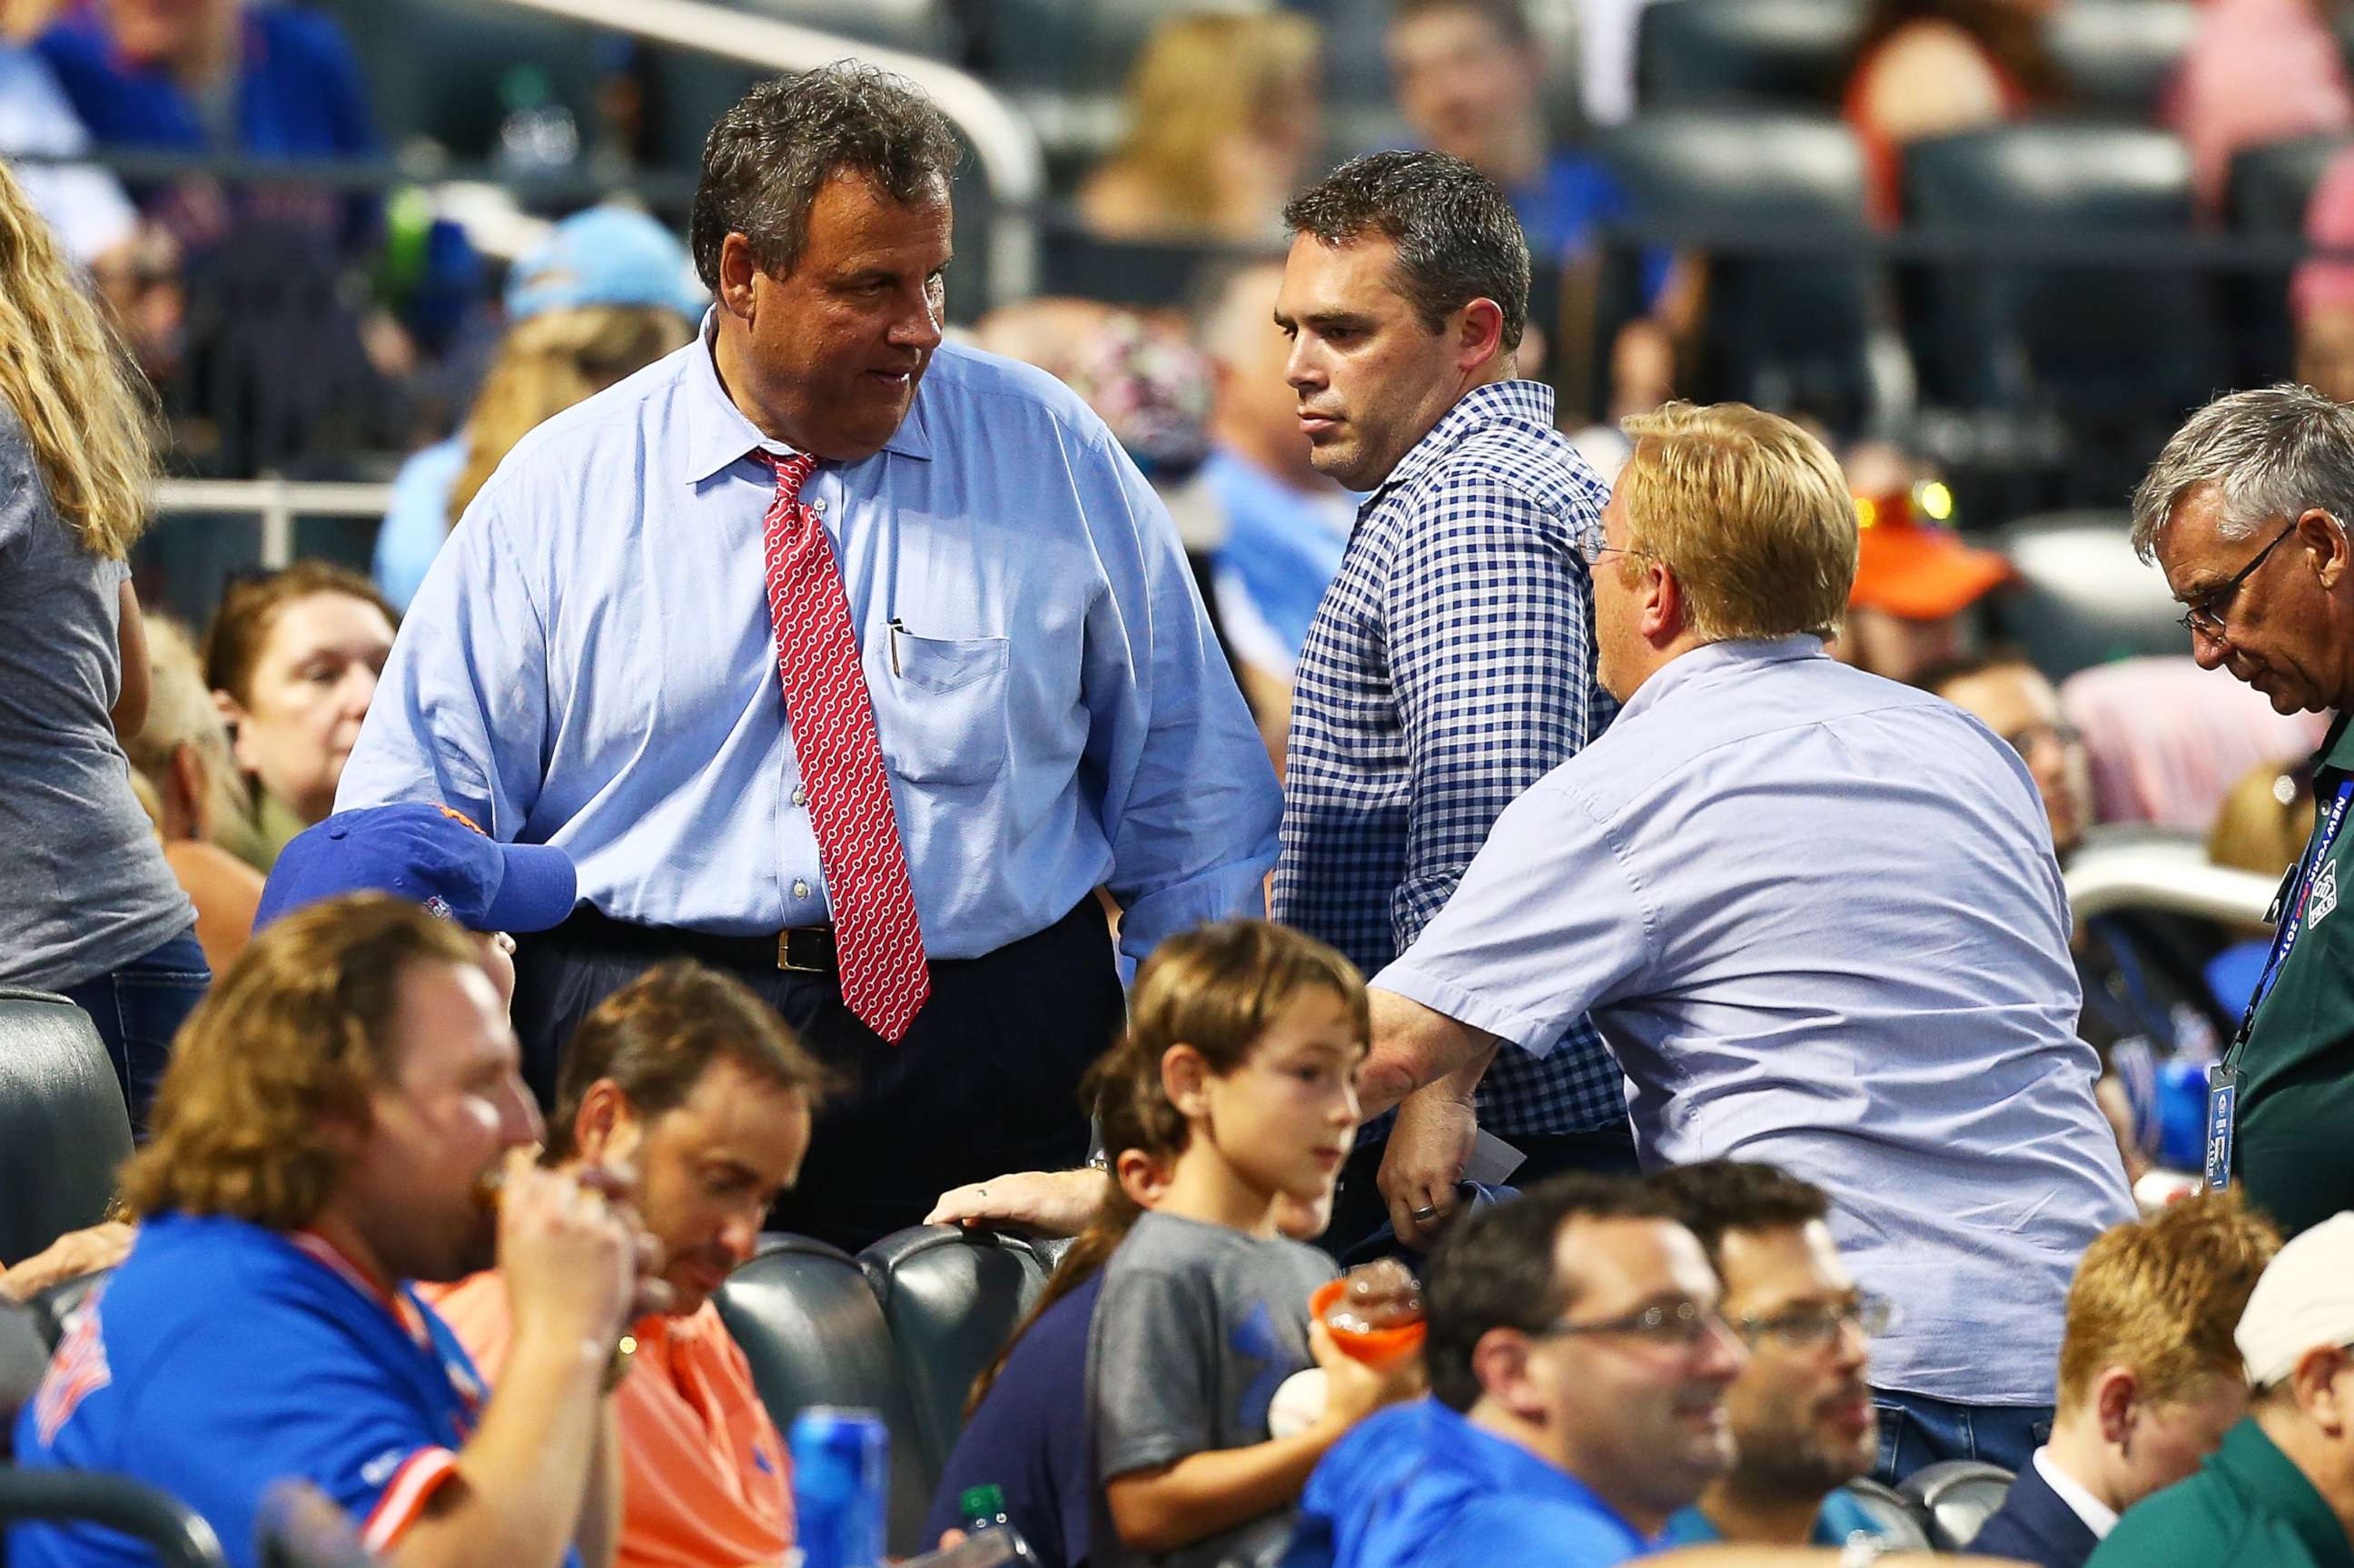 PHOTO: Governor of New Jersey Chris Christie attends the game between the New York Mets and the St. Louis Cardinals at Citi Field, July 18, 2017, Flushing, New York.